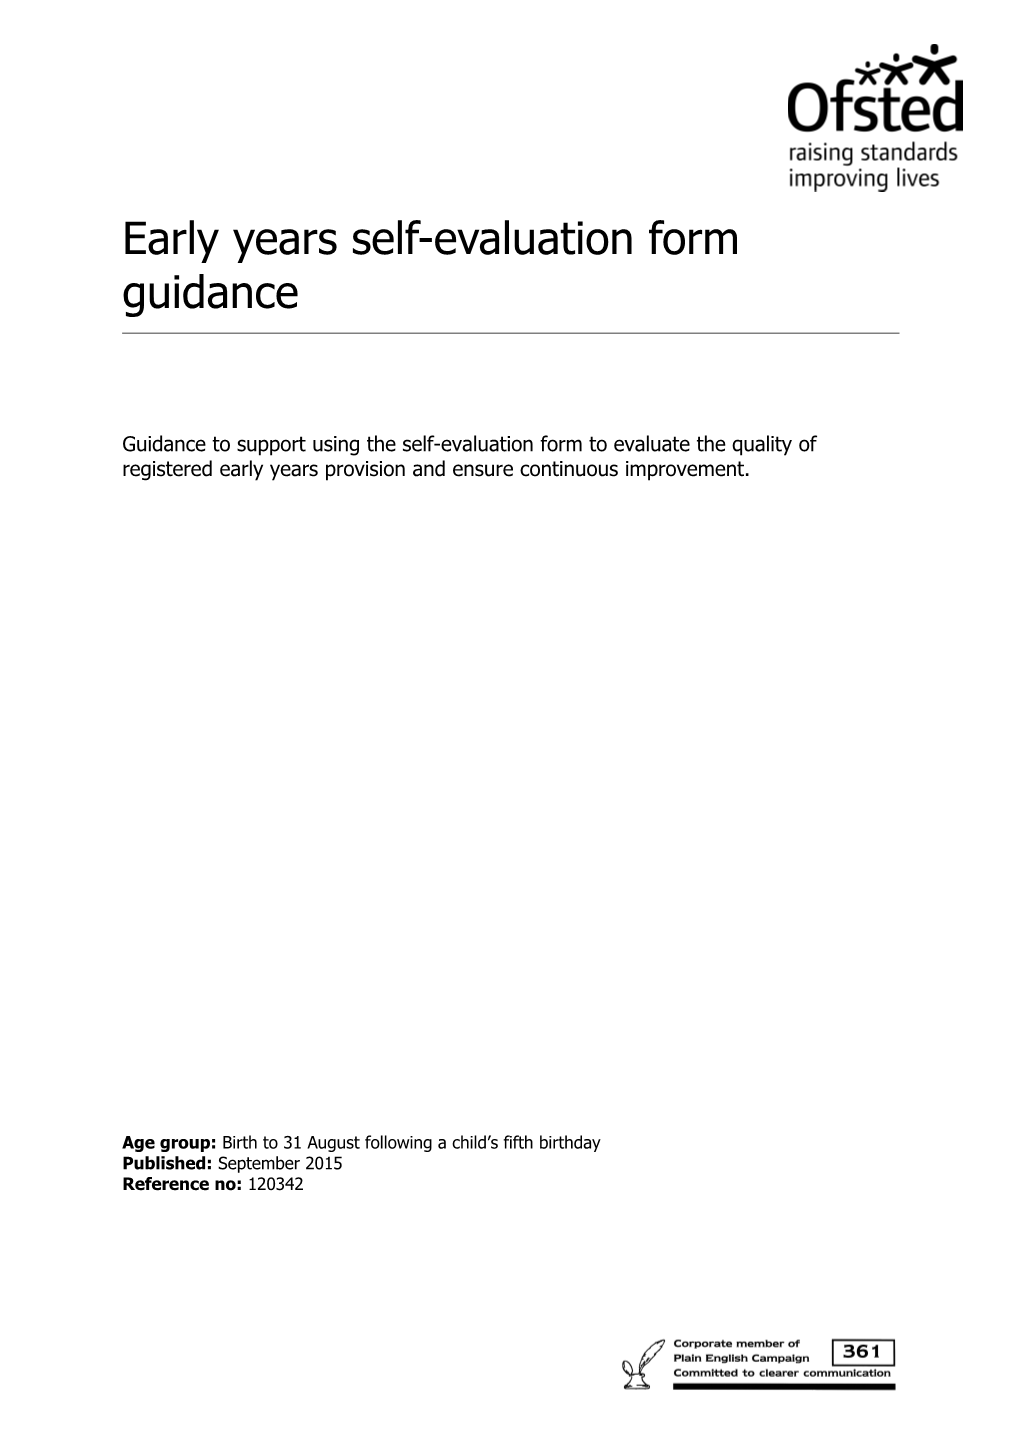 Early Years Self-Evaluation Form Guidance